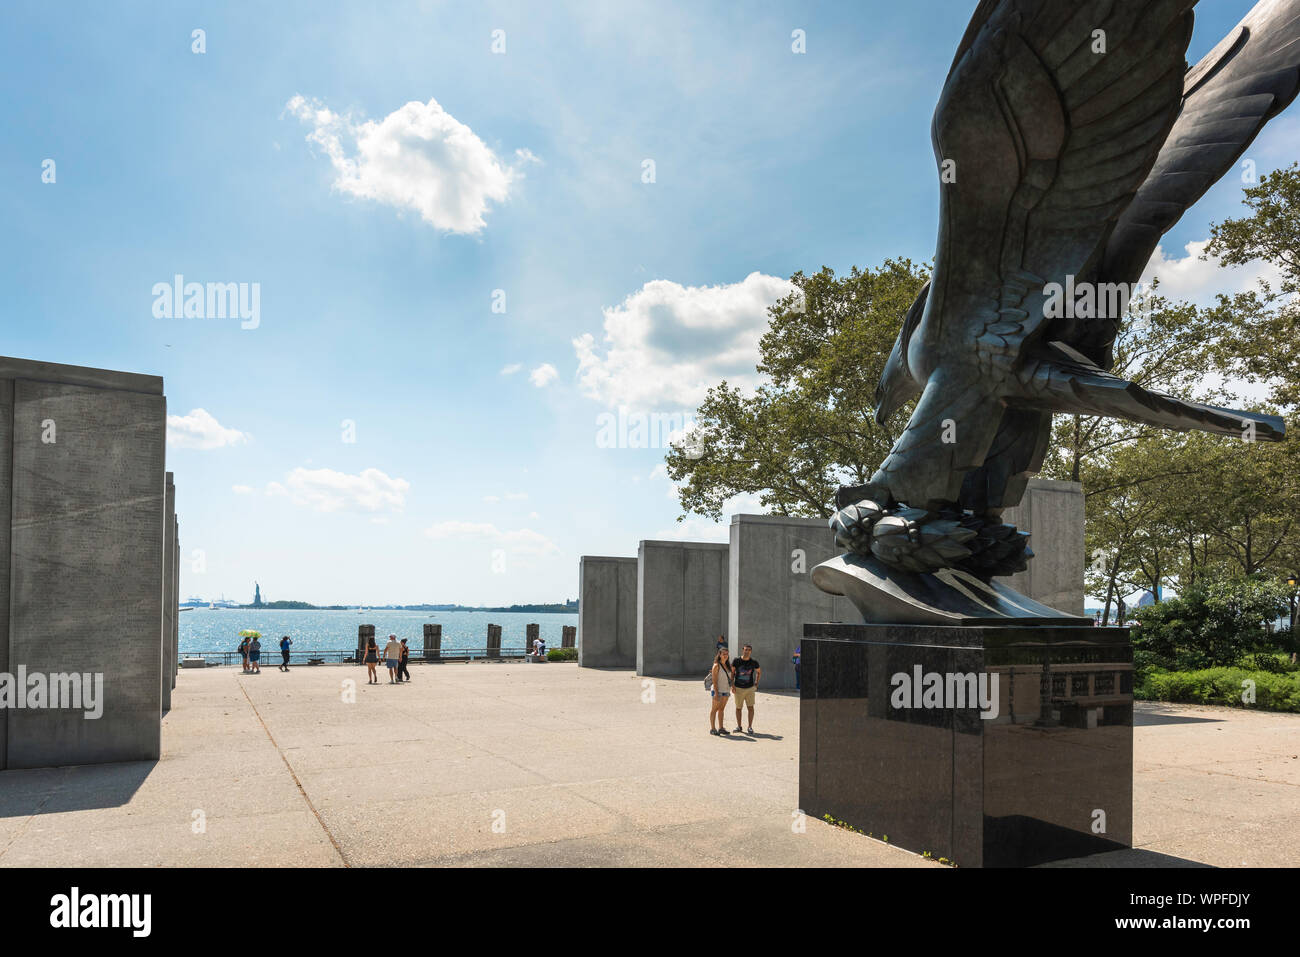 View of the East Coast Memorial - 8 huge granite slabs inscribed with all the names of navy personnel killed in WWII, Battery Park, New York City, USA Stock Photo